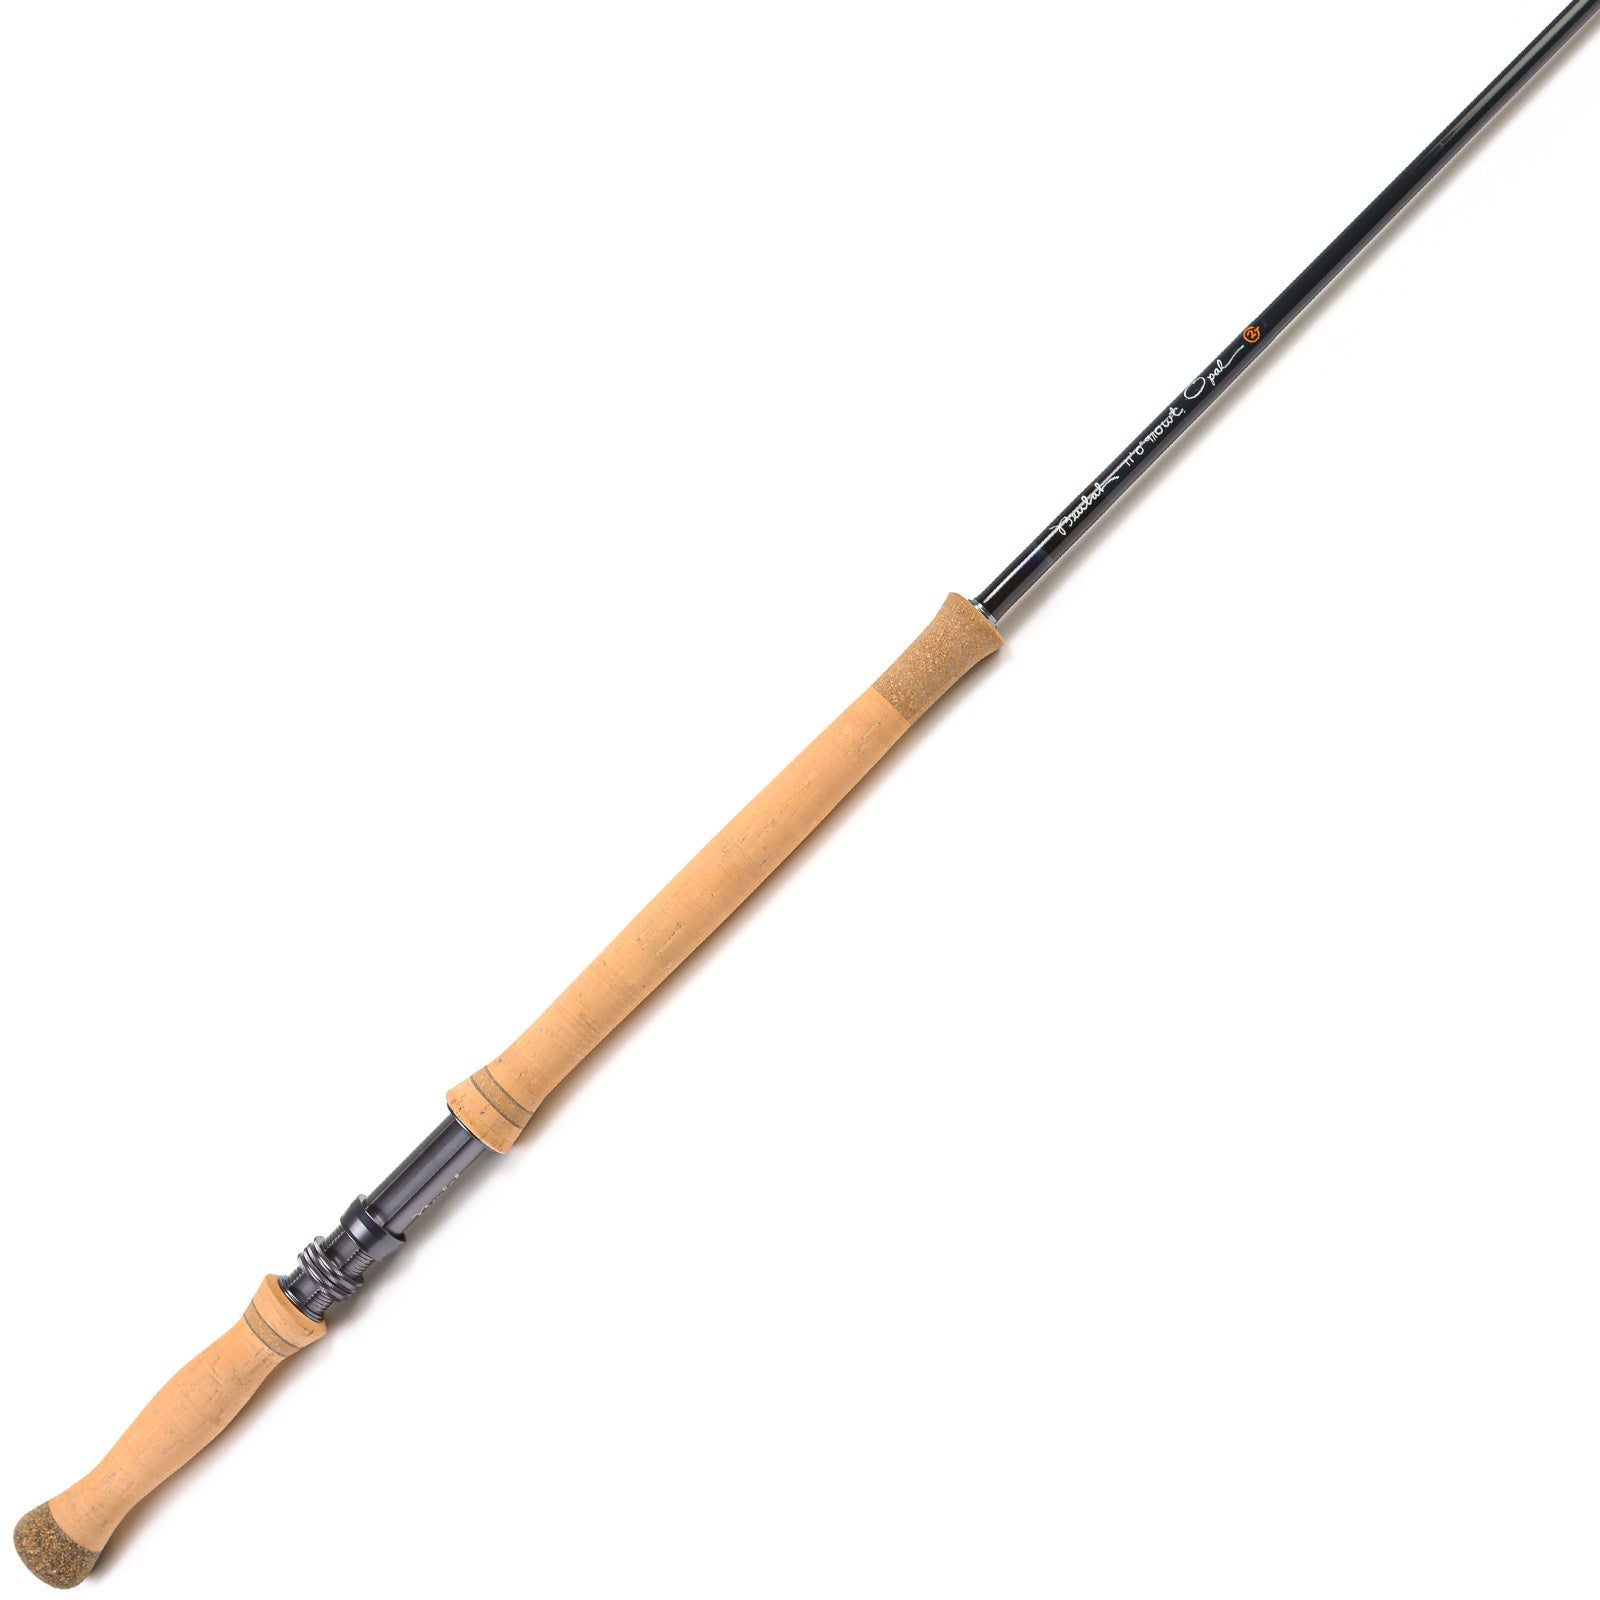 MAXCATCH SKYTOUCH TWO-HANDED Switch & Spey Fly Fishing rod Fast Action with  Tube $118.00 - PicClick